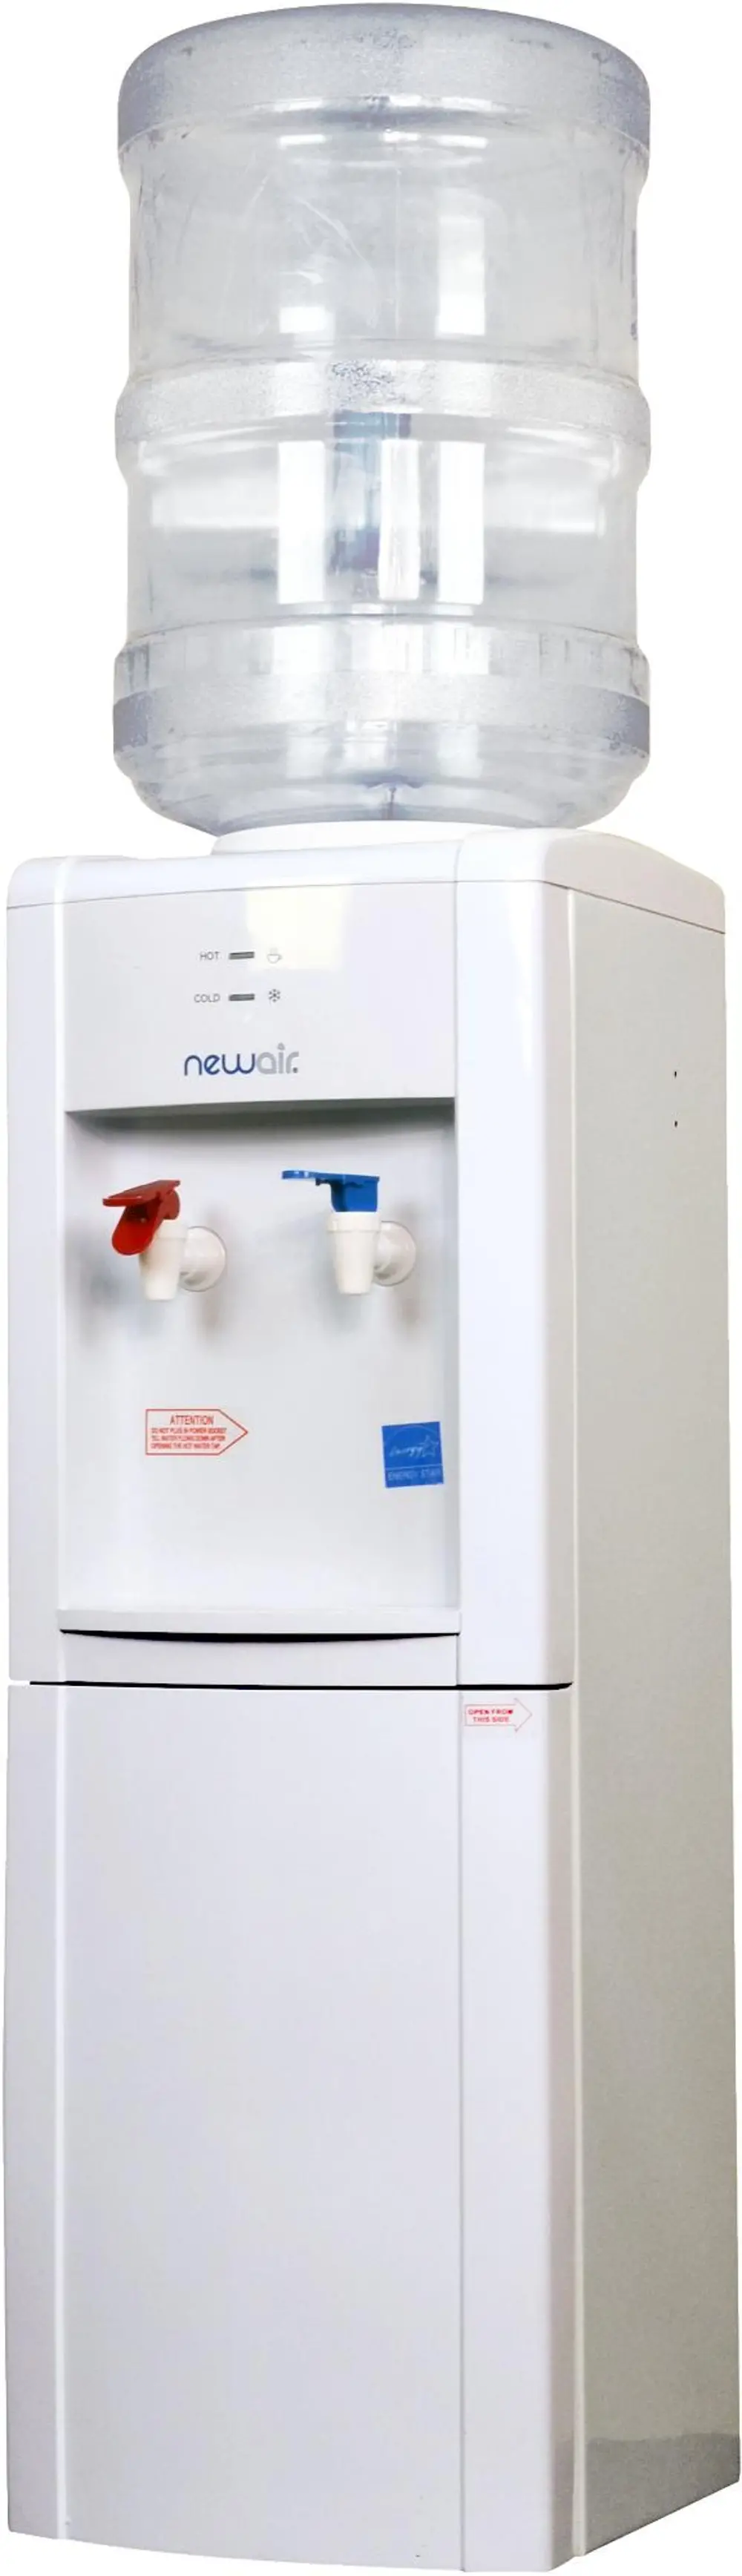 WCD-200W WCD-200W  White Energy Star Hot & Cold Water Dispenser-1